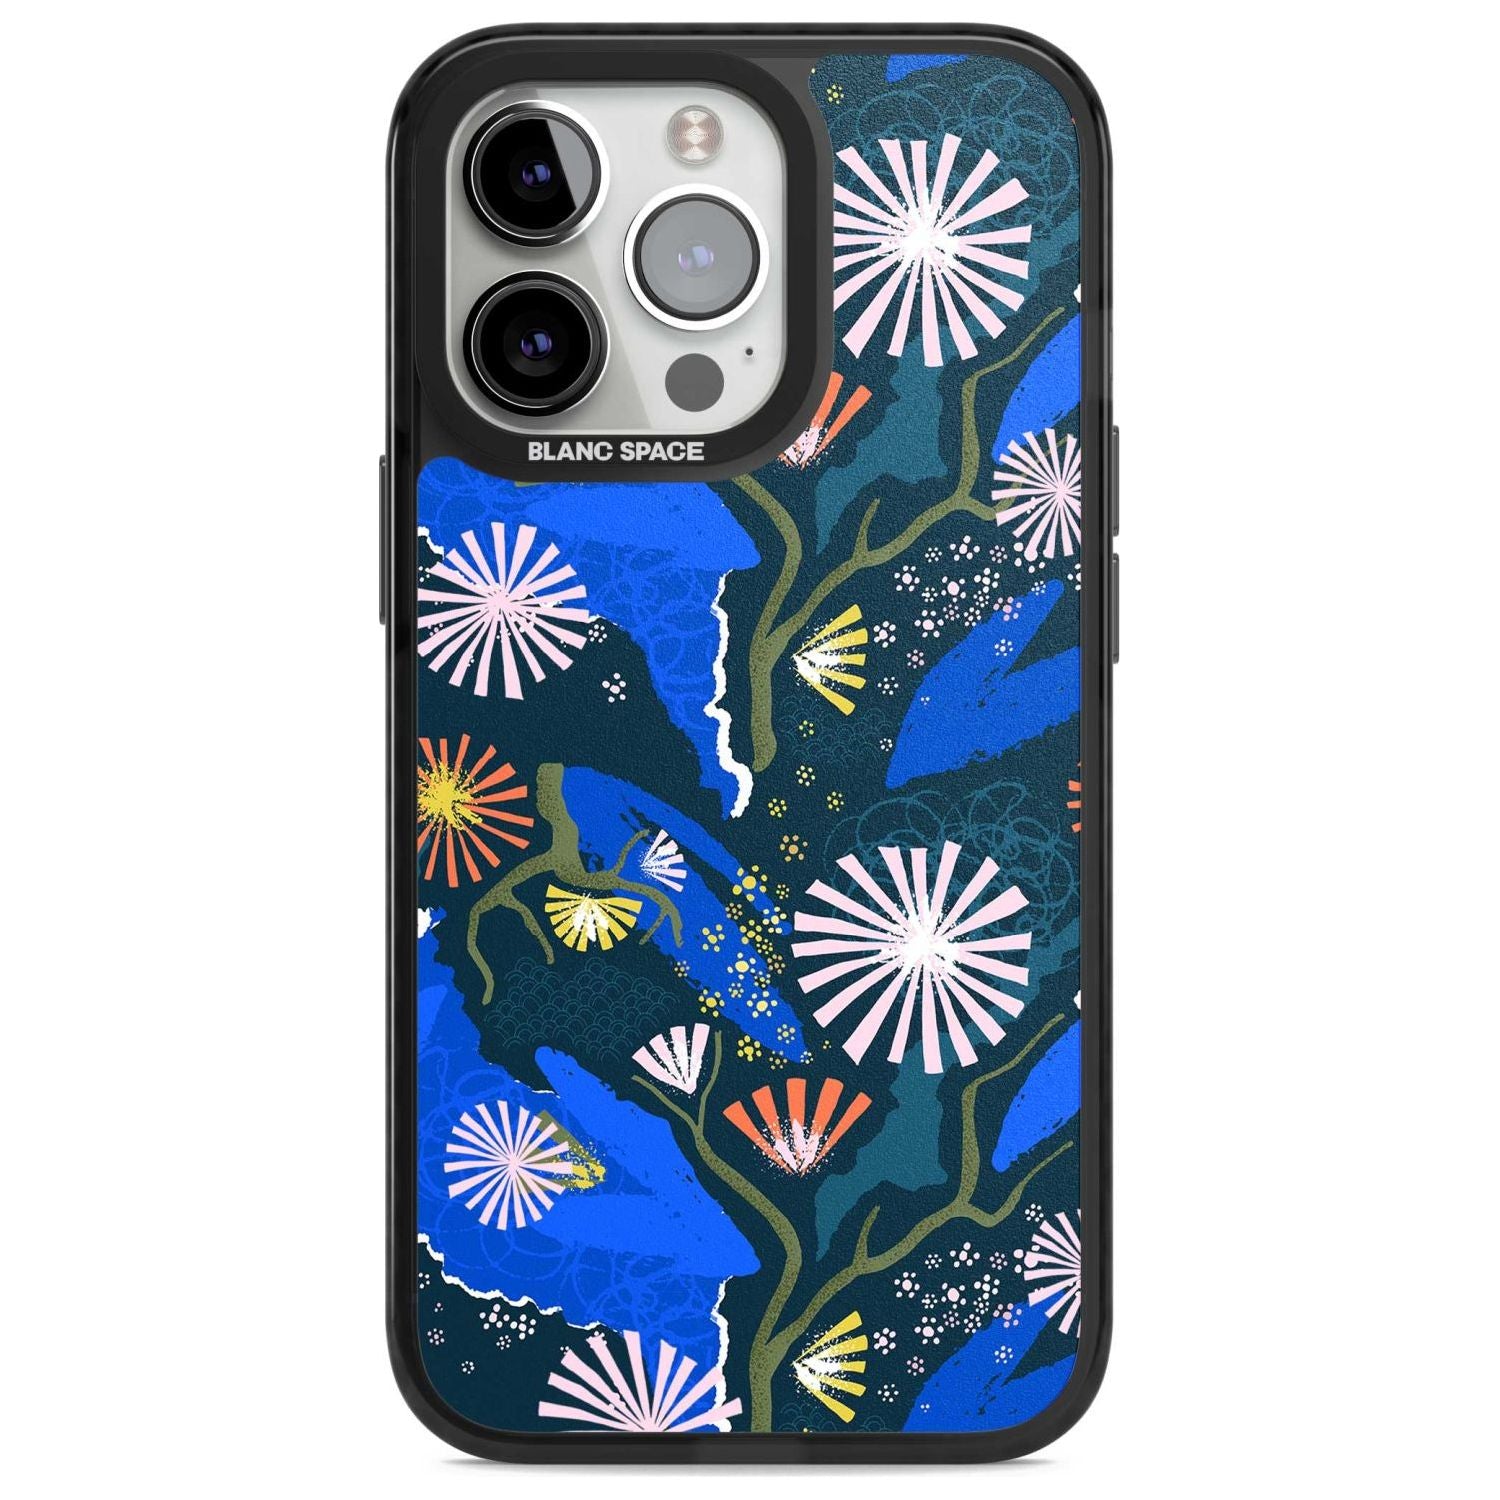 Dark Botanicals Abstract Pattern Phone Case iPhone 15 Pro Max / Magsafe Black Impact Case,iPhone 15 Pro / Magsafe Black Impact Case,iPhone 14 Pro Max / Magsafe Black Impact Case,iPhone 14 Pro / Magsafe Black Impact Case,iPhone 13 Pro / Magsafe Black Impact Case Blanc Space